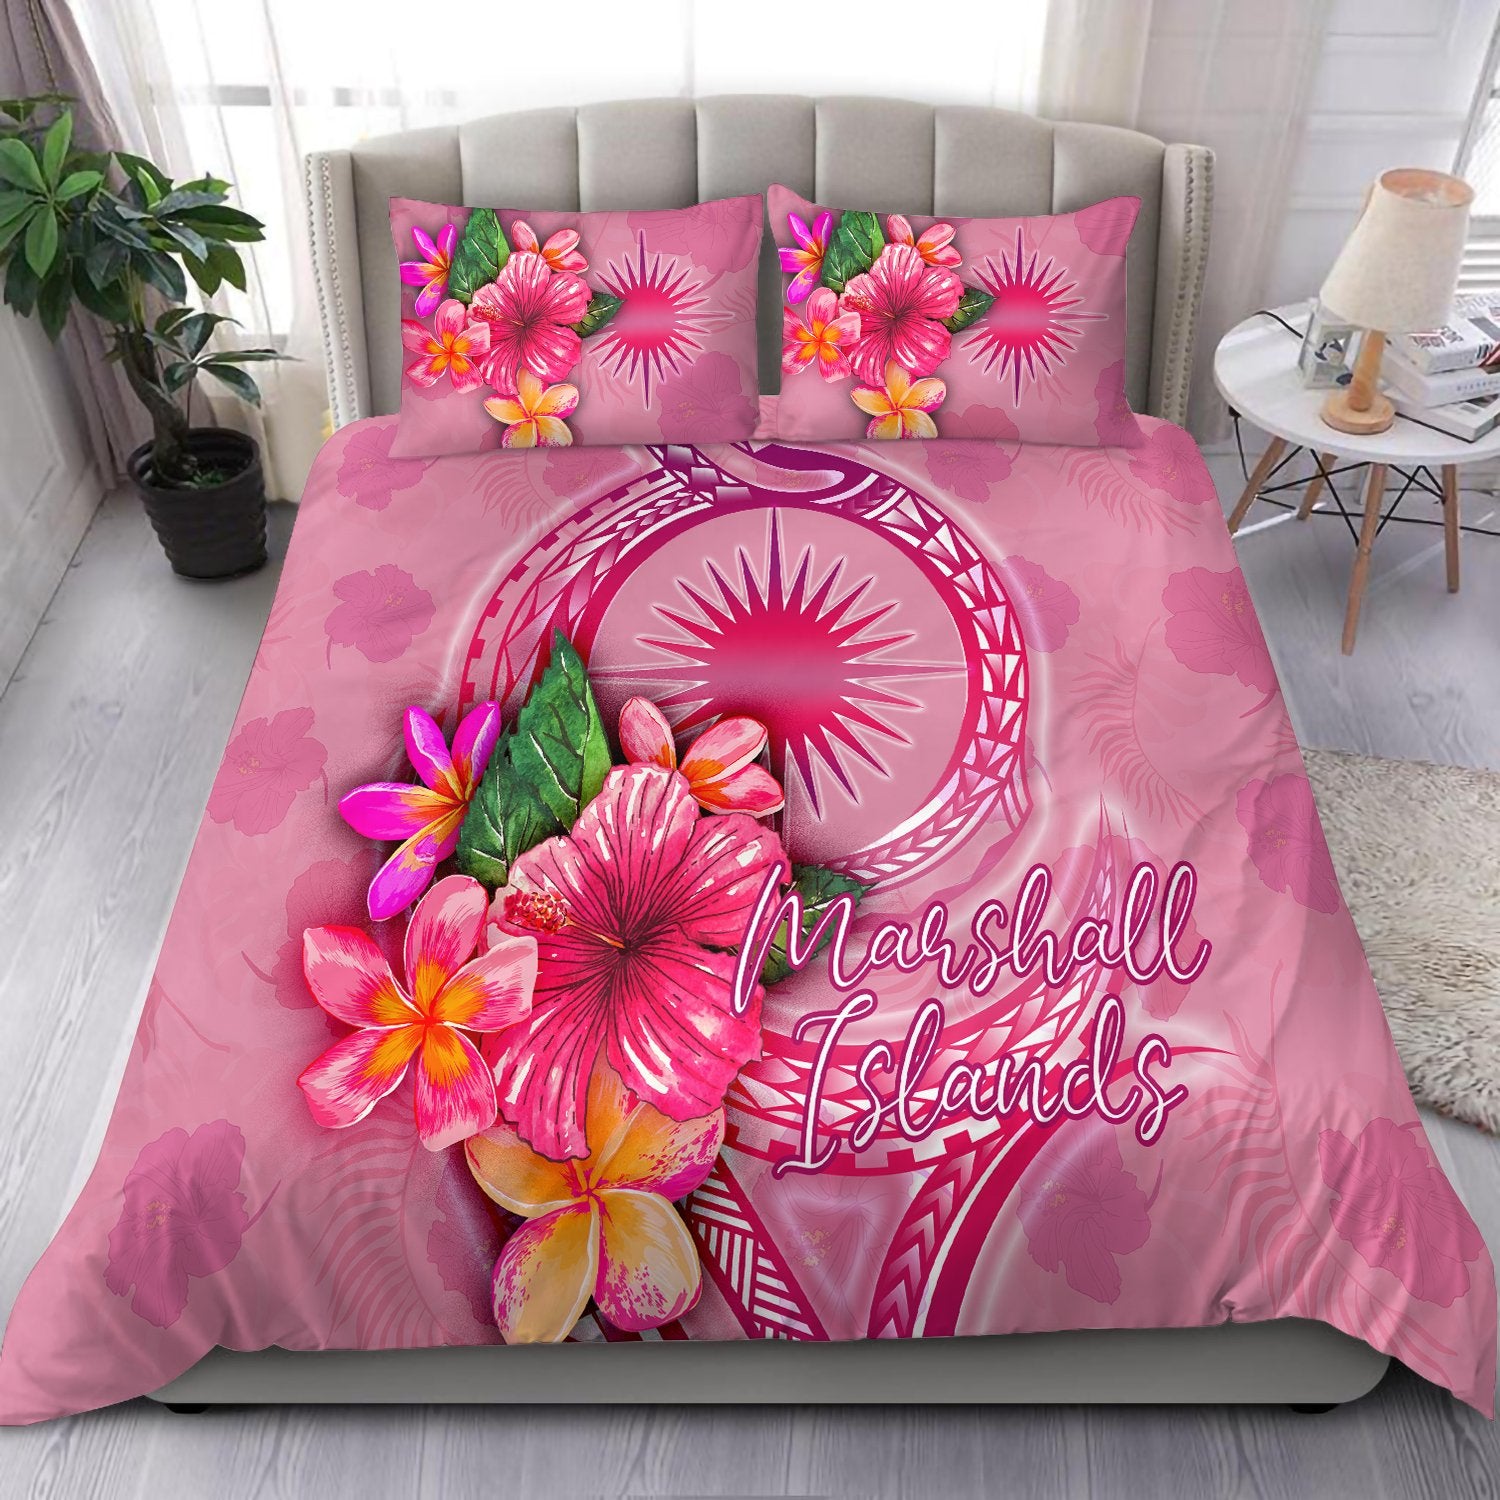 Marshall Islands Polynesian Bedding Set - Floral With Seal Pink Pink - Polynesian Pride